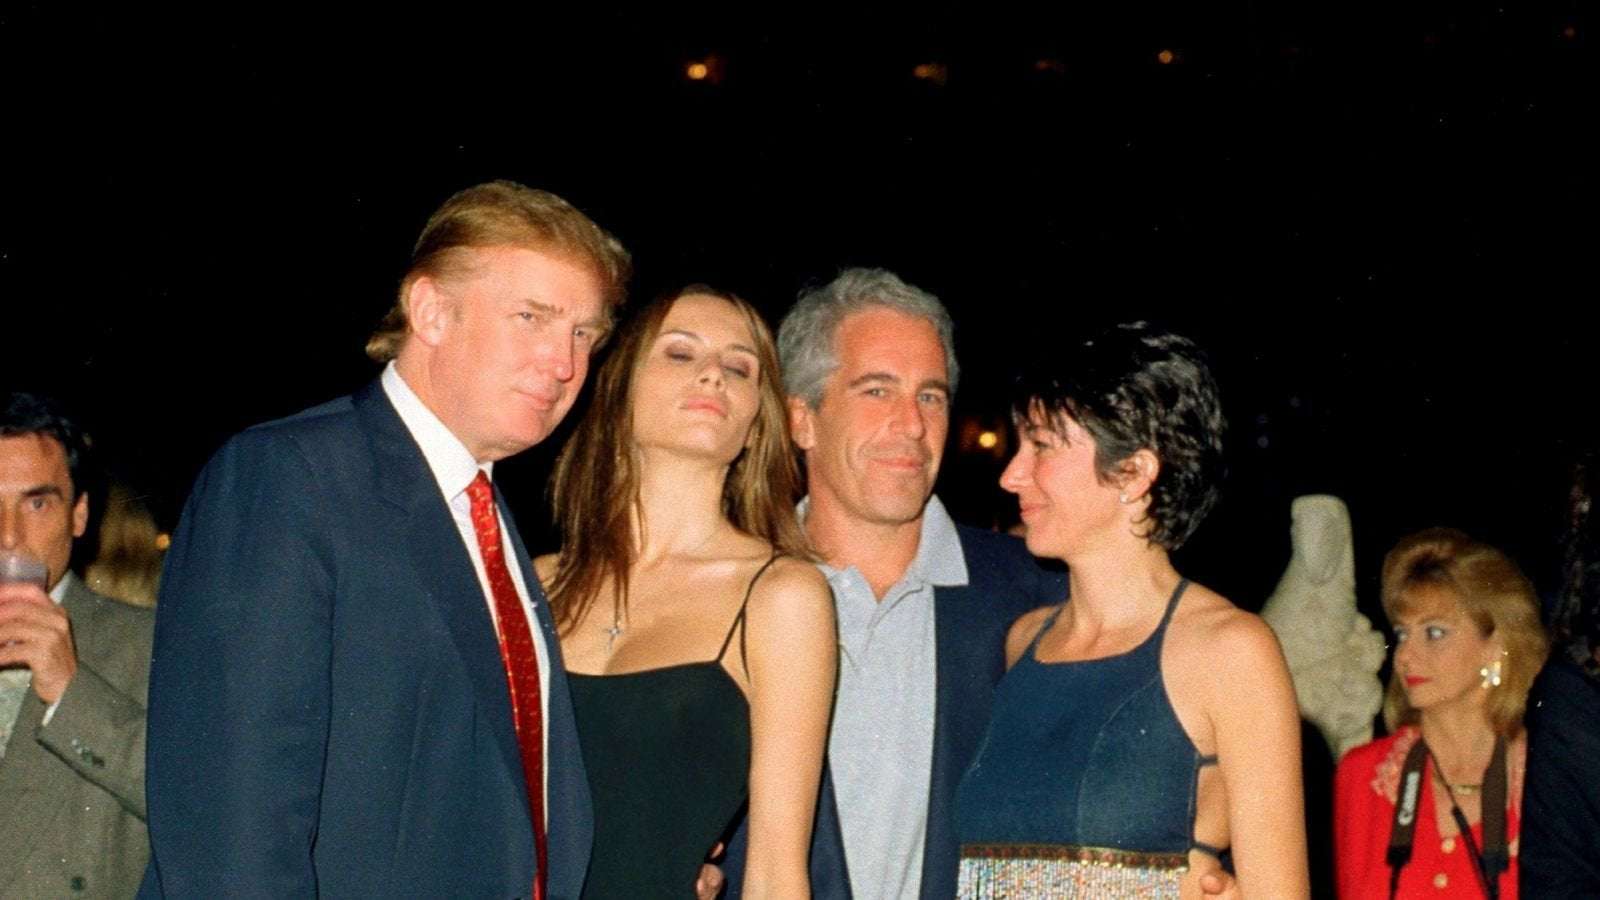 image for Ghislaine Maxwell is accused of sex trafficking underage girls, but Trump says: 'I wish her well'